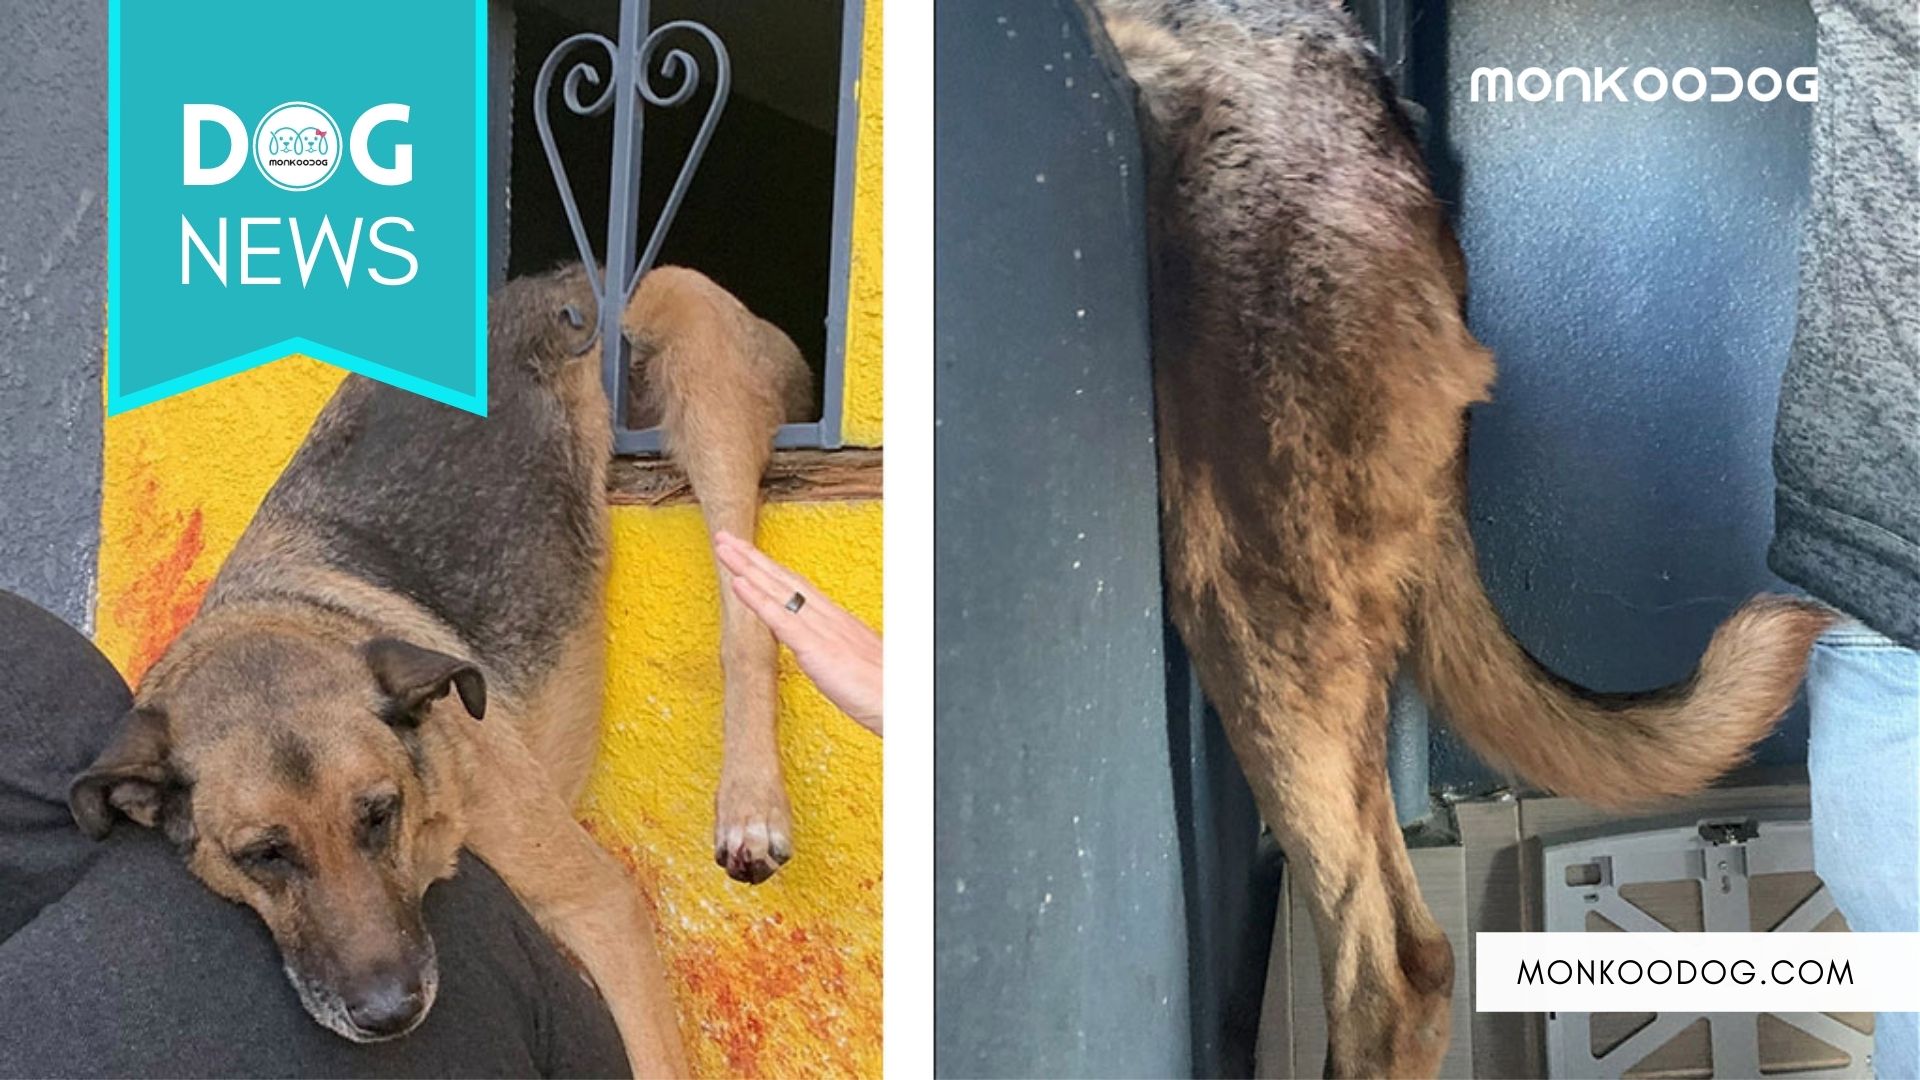 German Shepherd Got Saved From The Frame Window After Hanging for Hours.